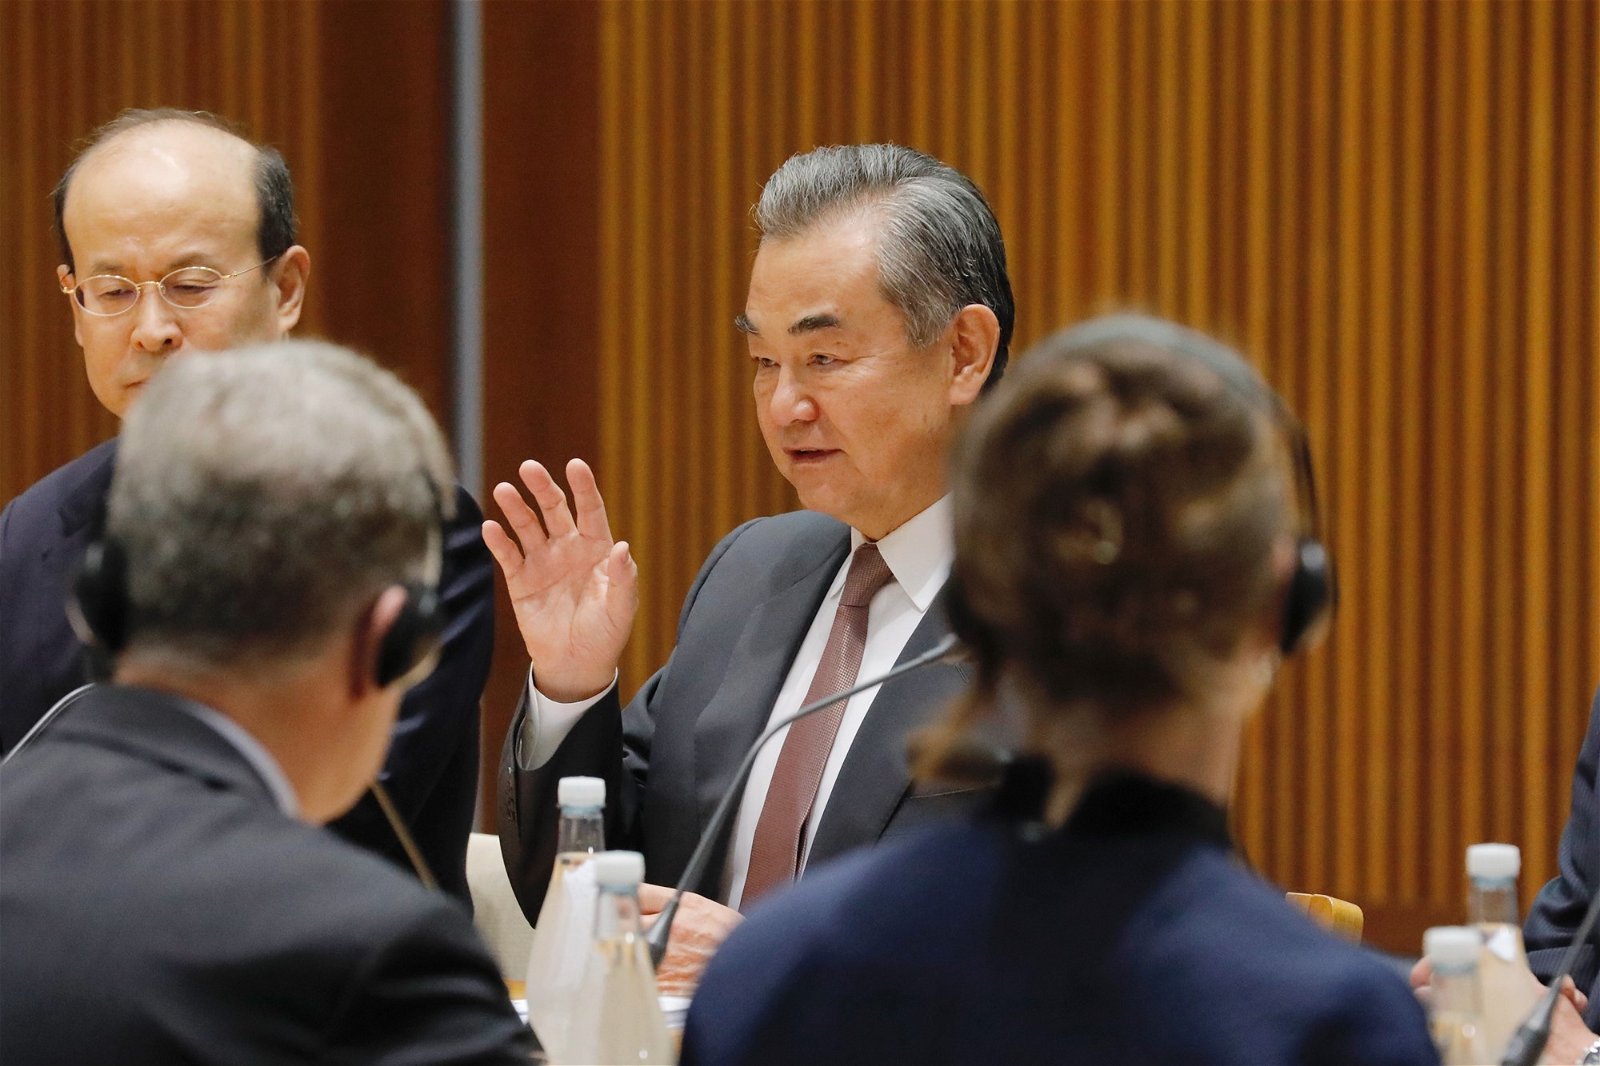 Wang Yi sitting at a table with his hand raised. 